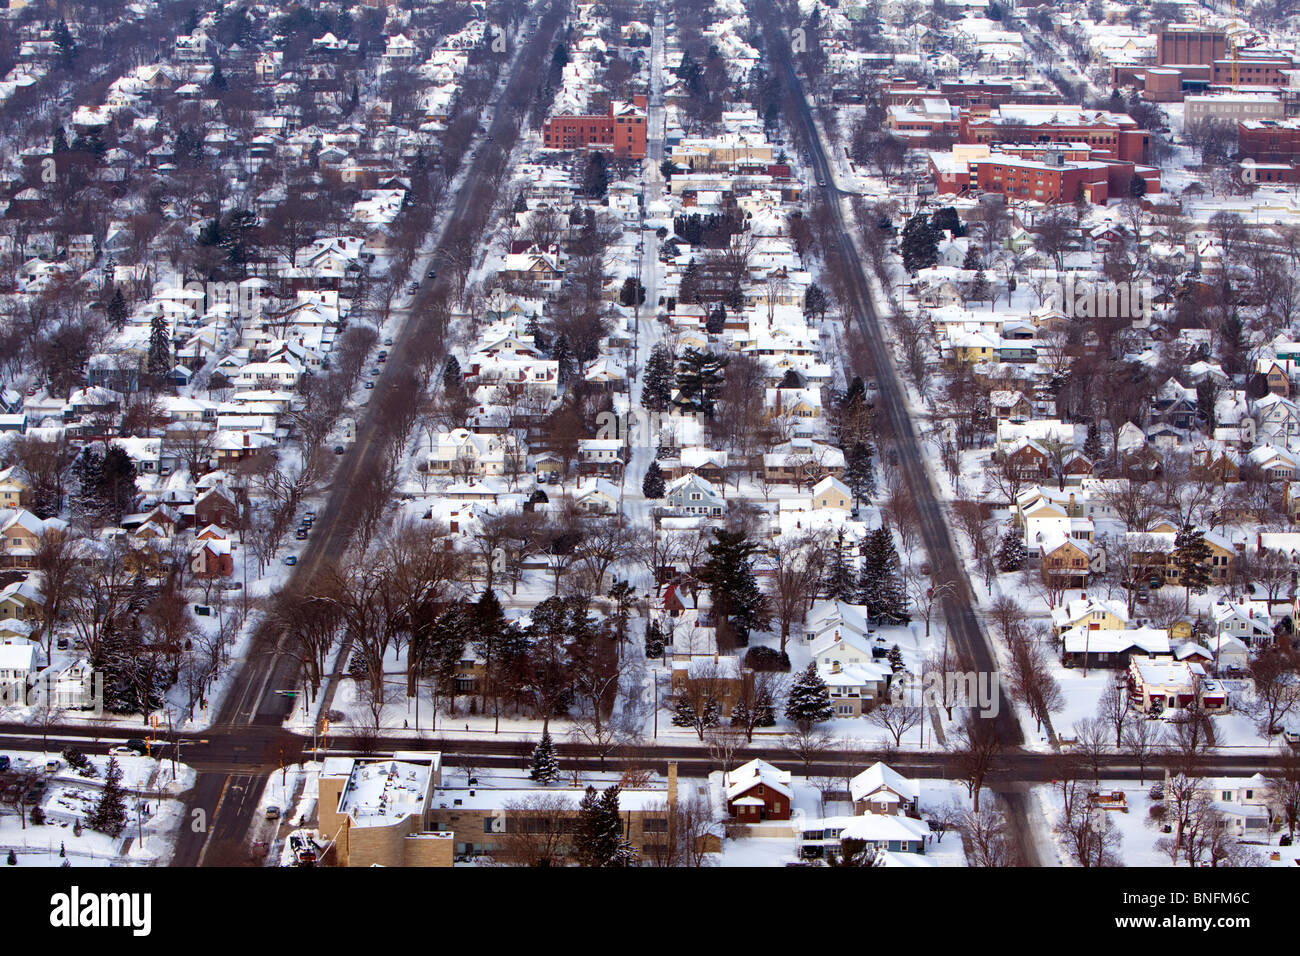 Seen from high above on a bluff, the town of La Crosse, WI is coated in winter snow. Stock Photo